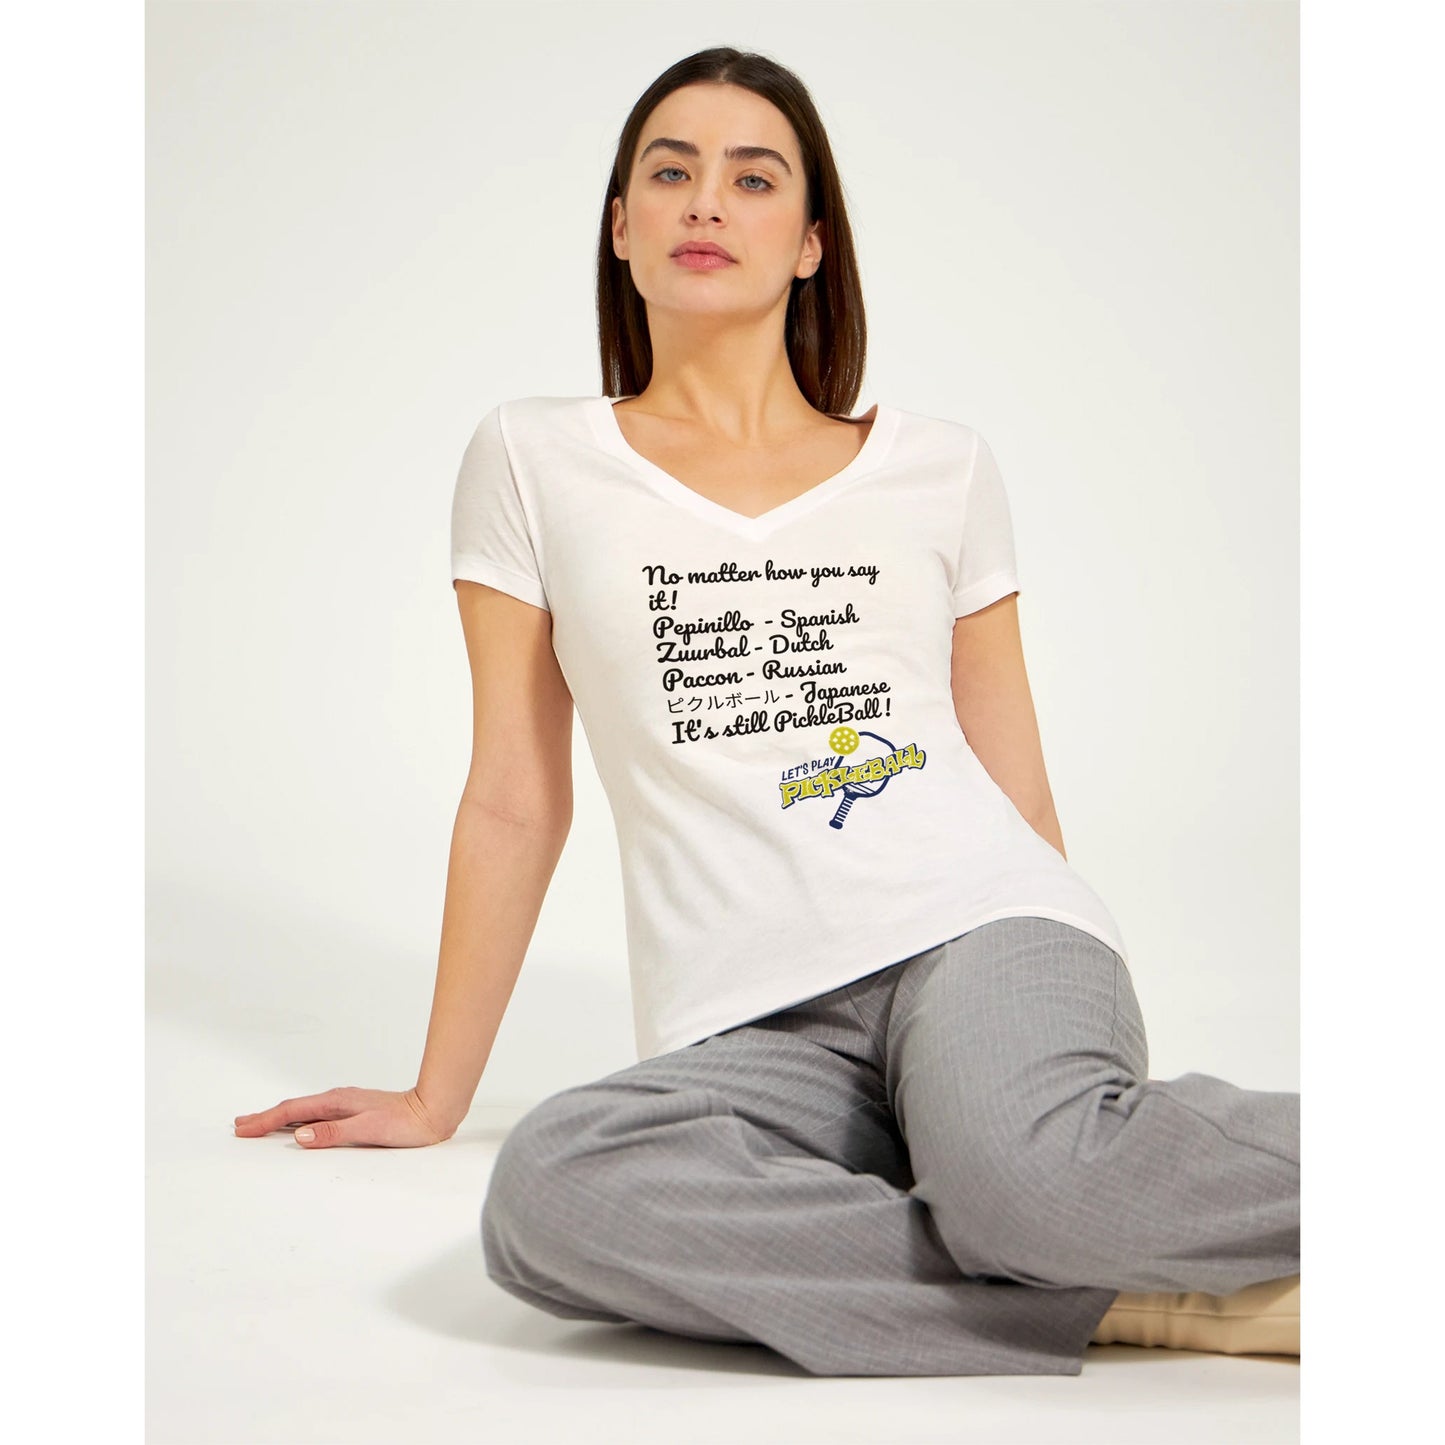 A premium women’s V-neck t-shirt from combed and ring-spun cotton original logo No matter how you say it and it's still Pickleball and Let's Play PIckleball logo on front worn by a dark-haired female model sitting on floor.